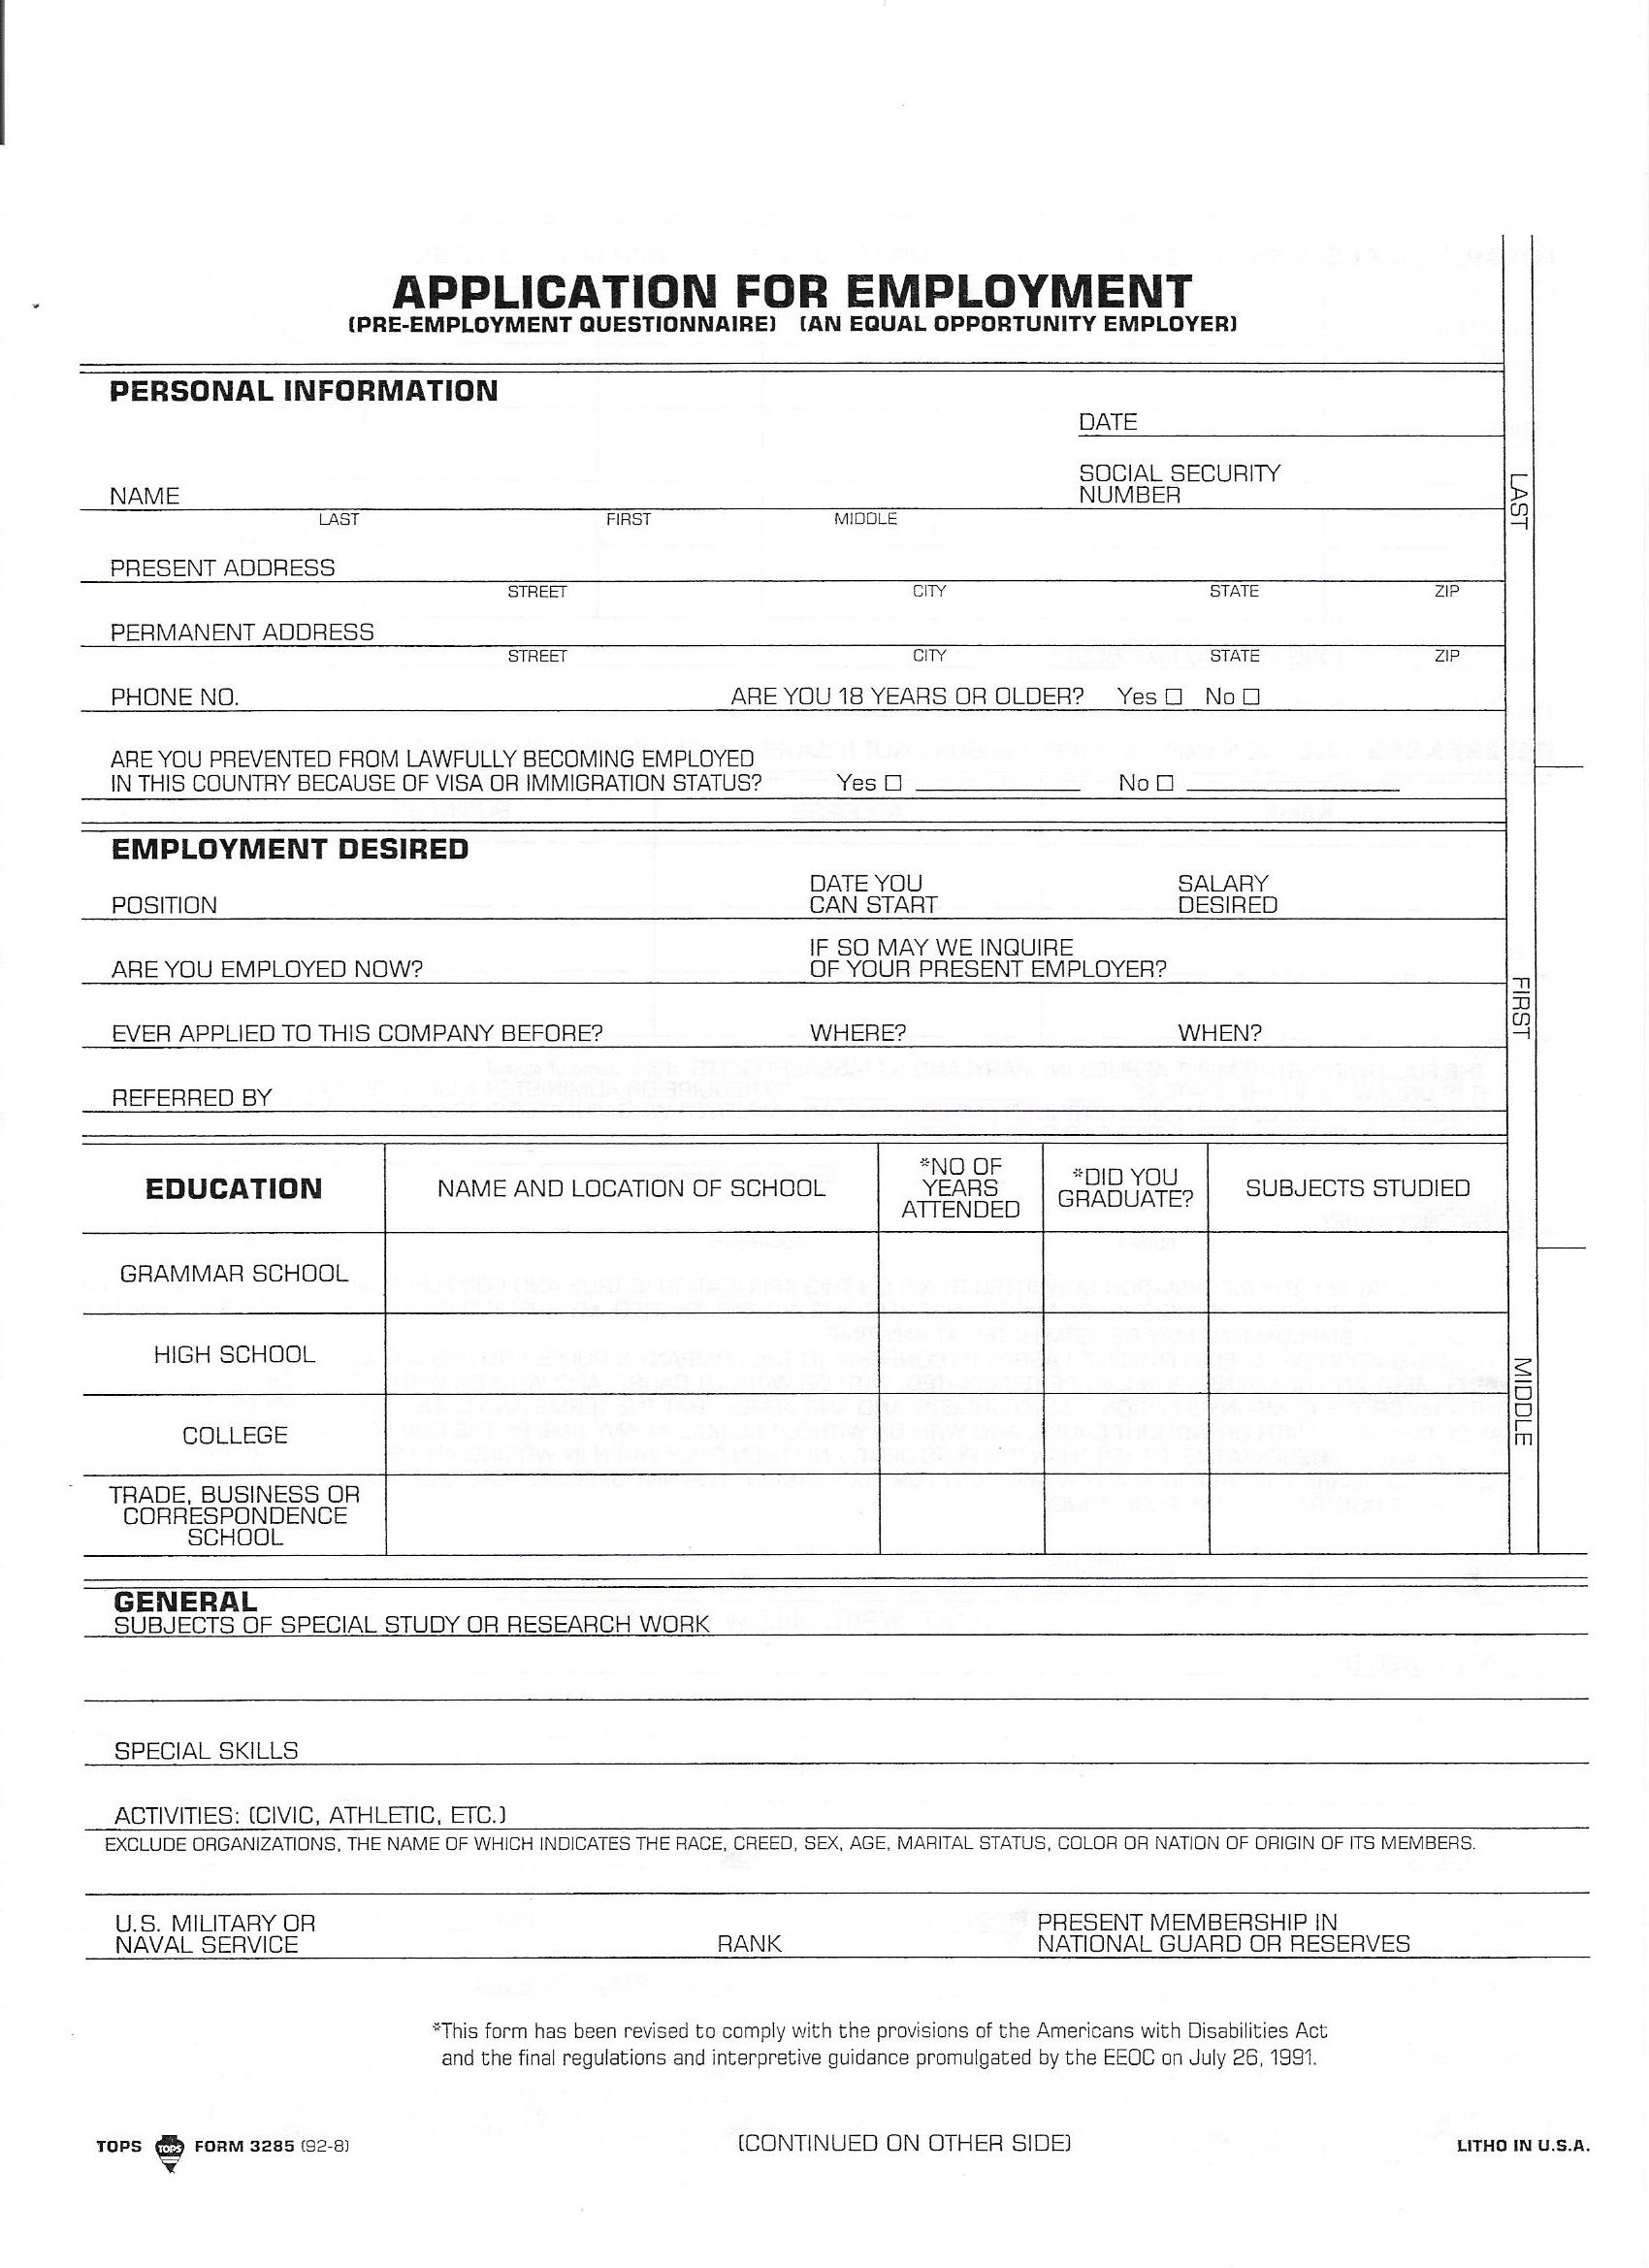 Free Printable Application For Employment - Printable Templates by Nora